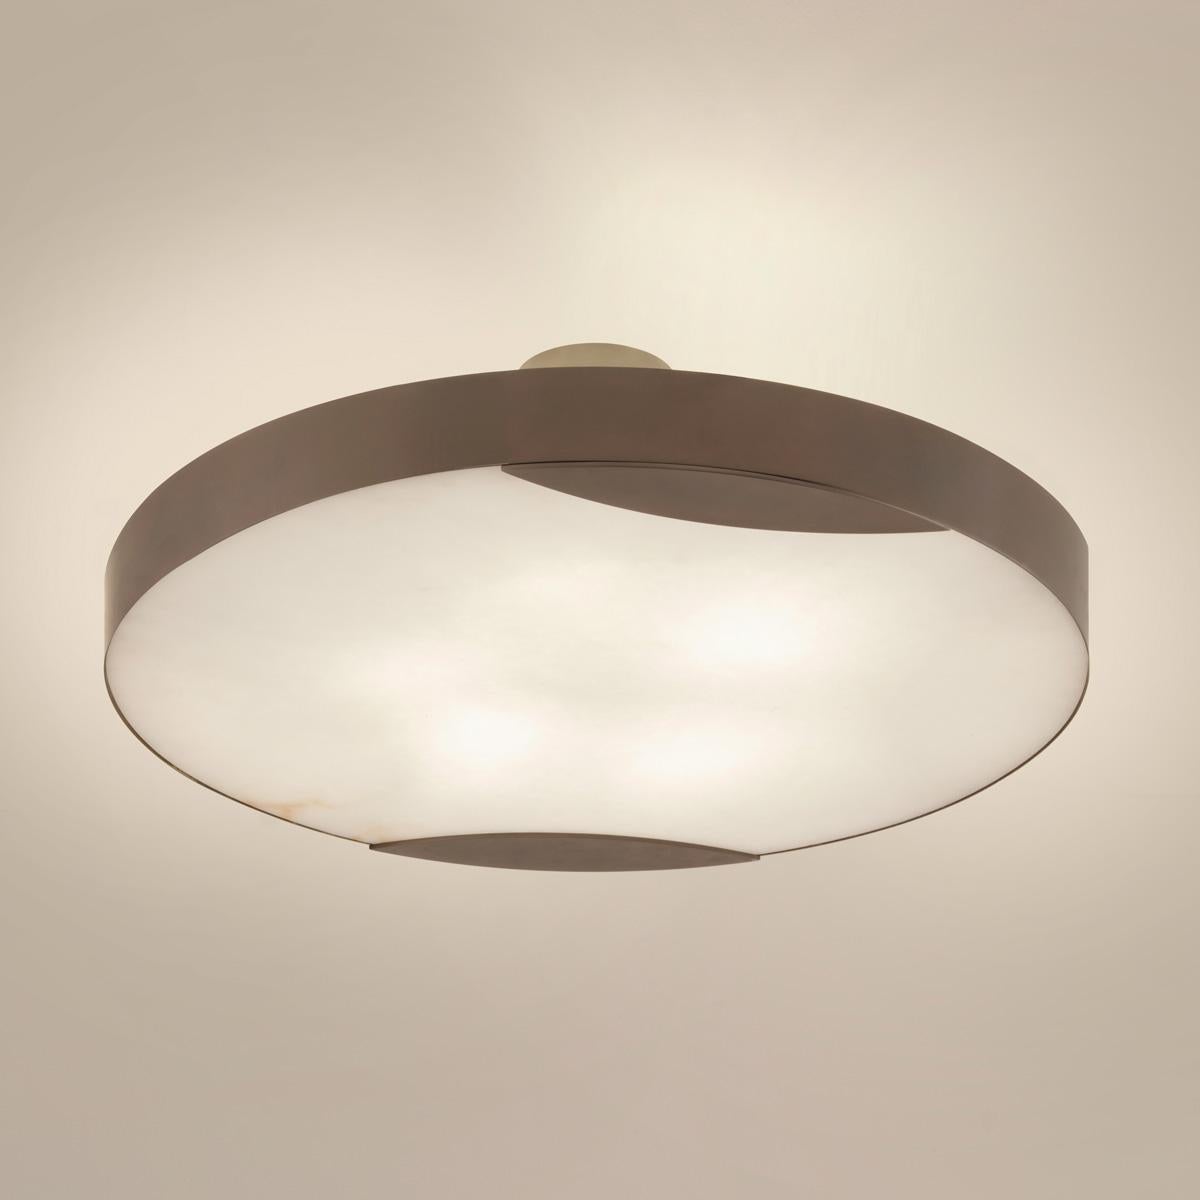 Italian Cloud N.1 Ceiling Light by Gaspare Asaro-Bronze Finish For Sale